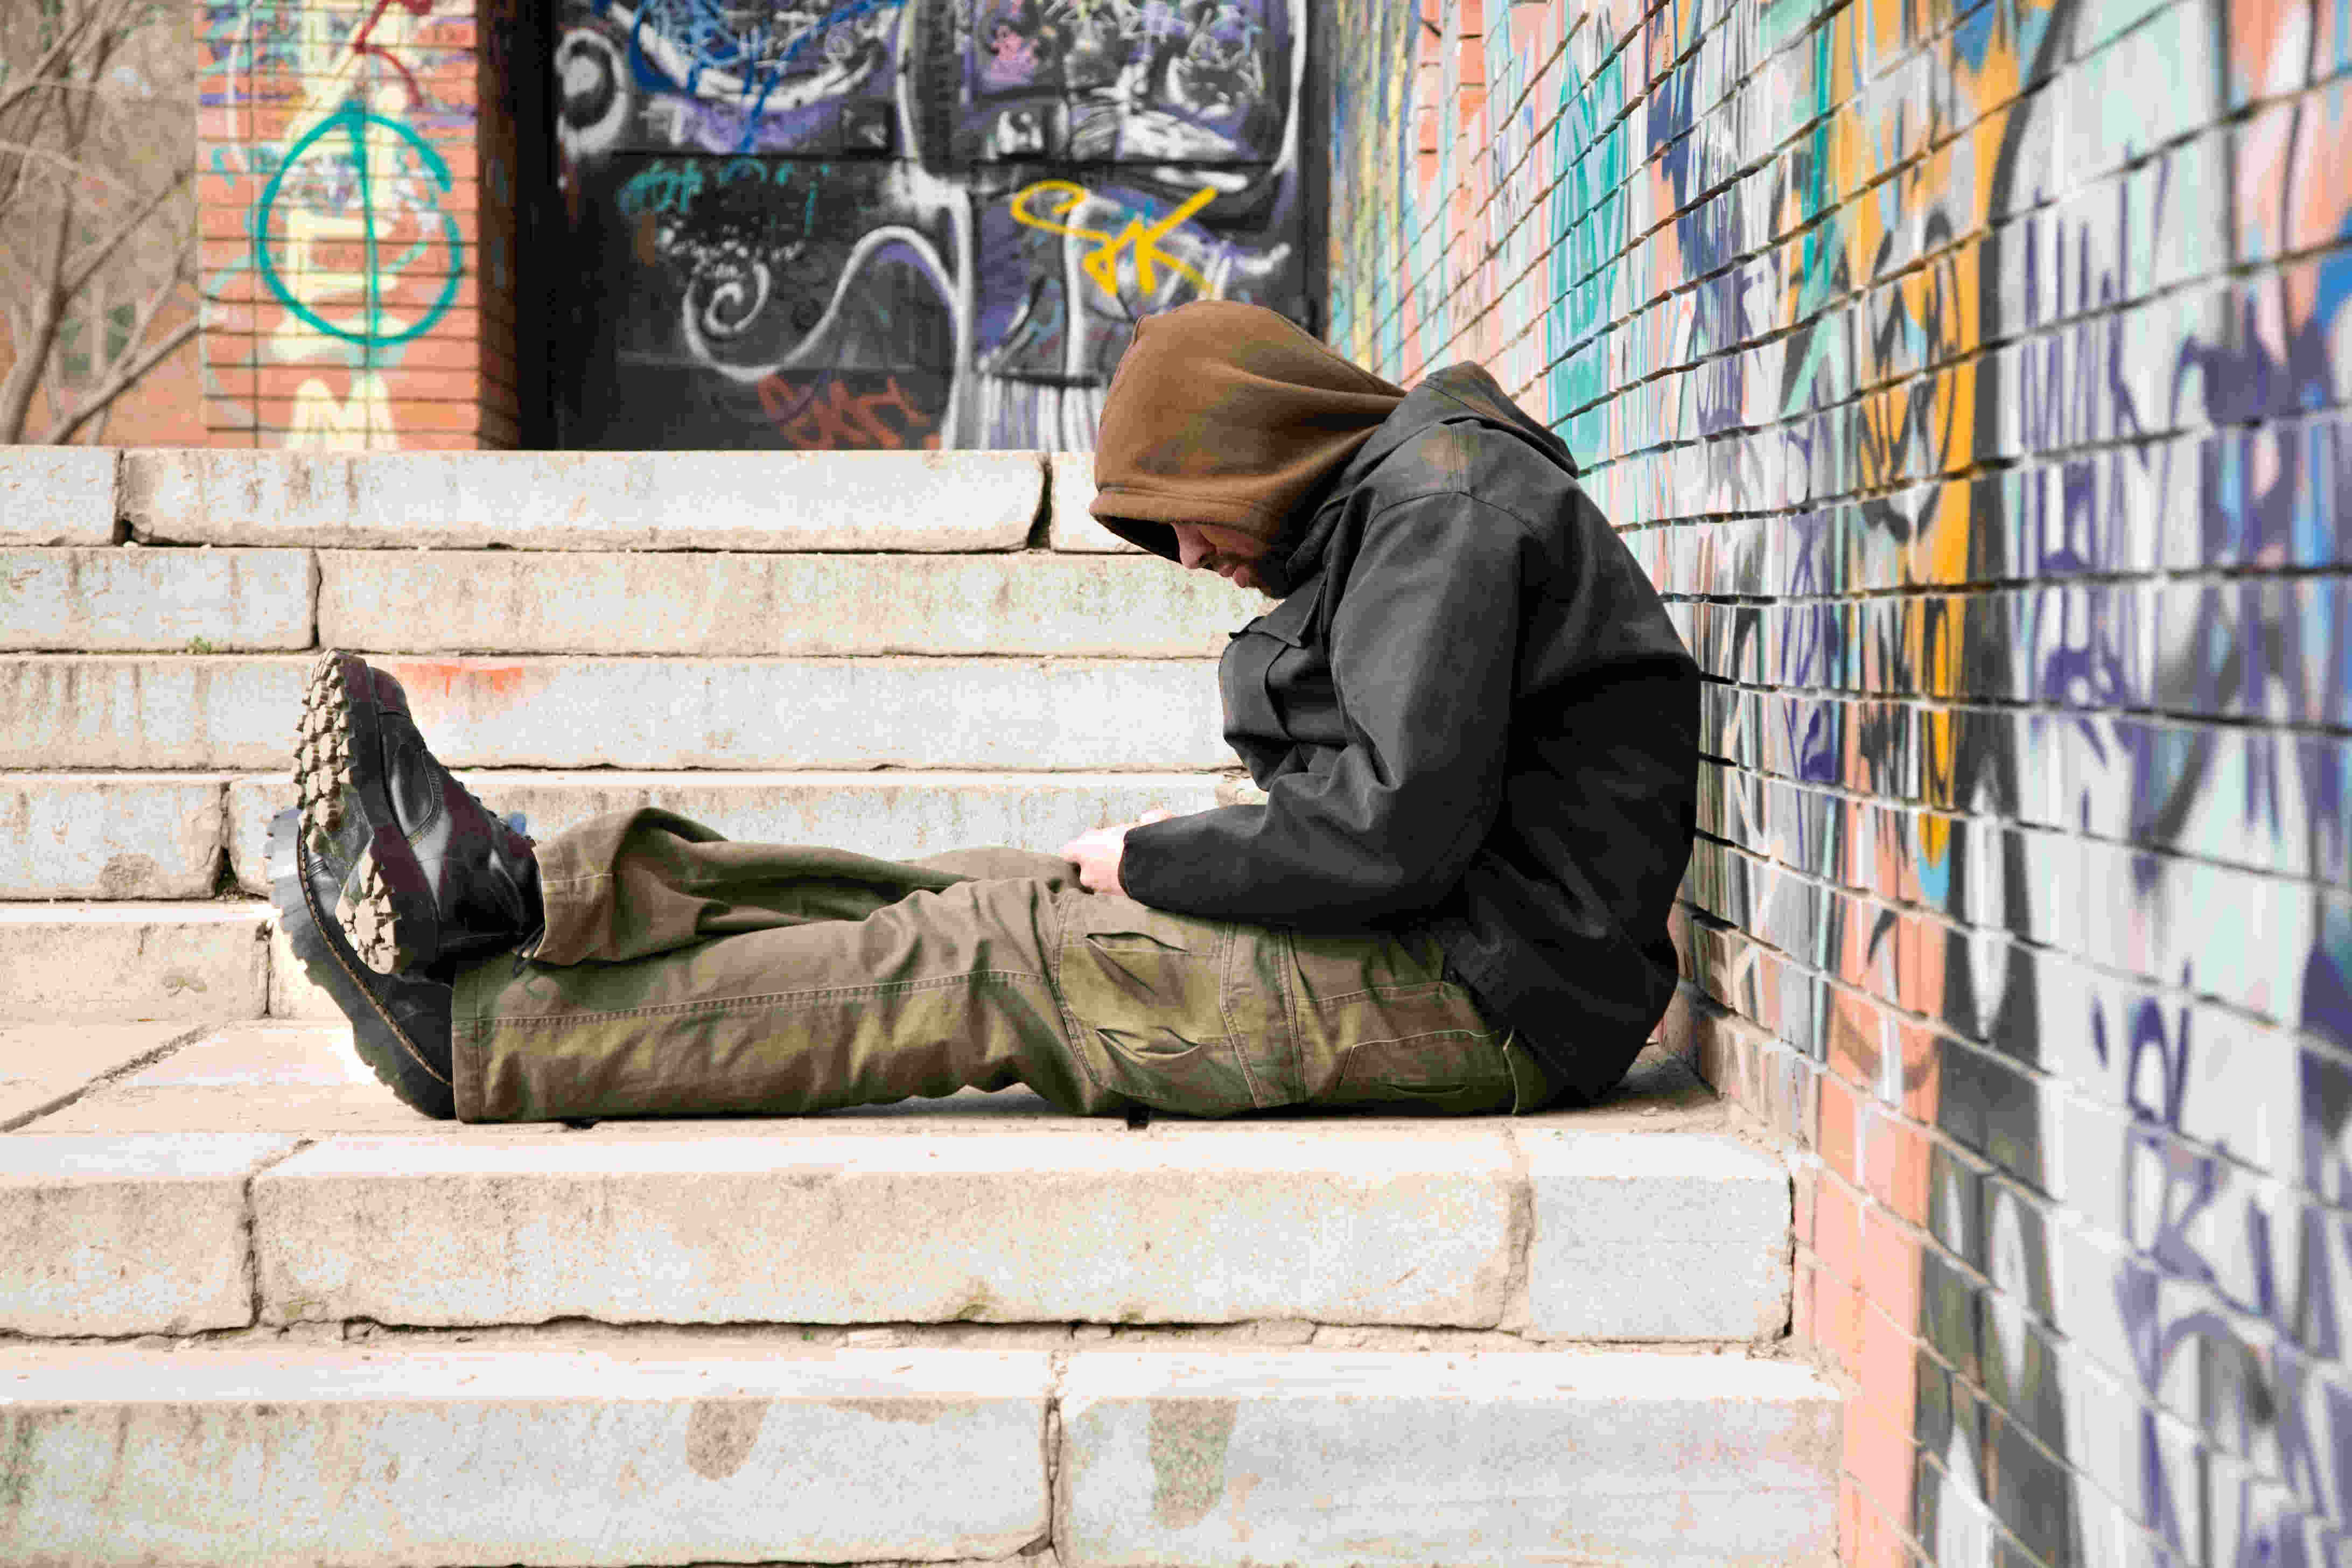 Audio – A safe place for homeless teens